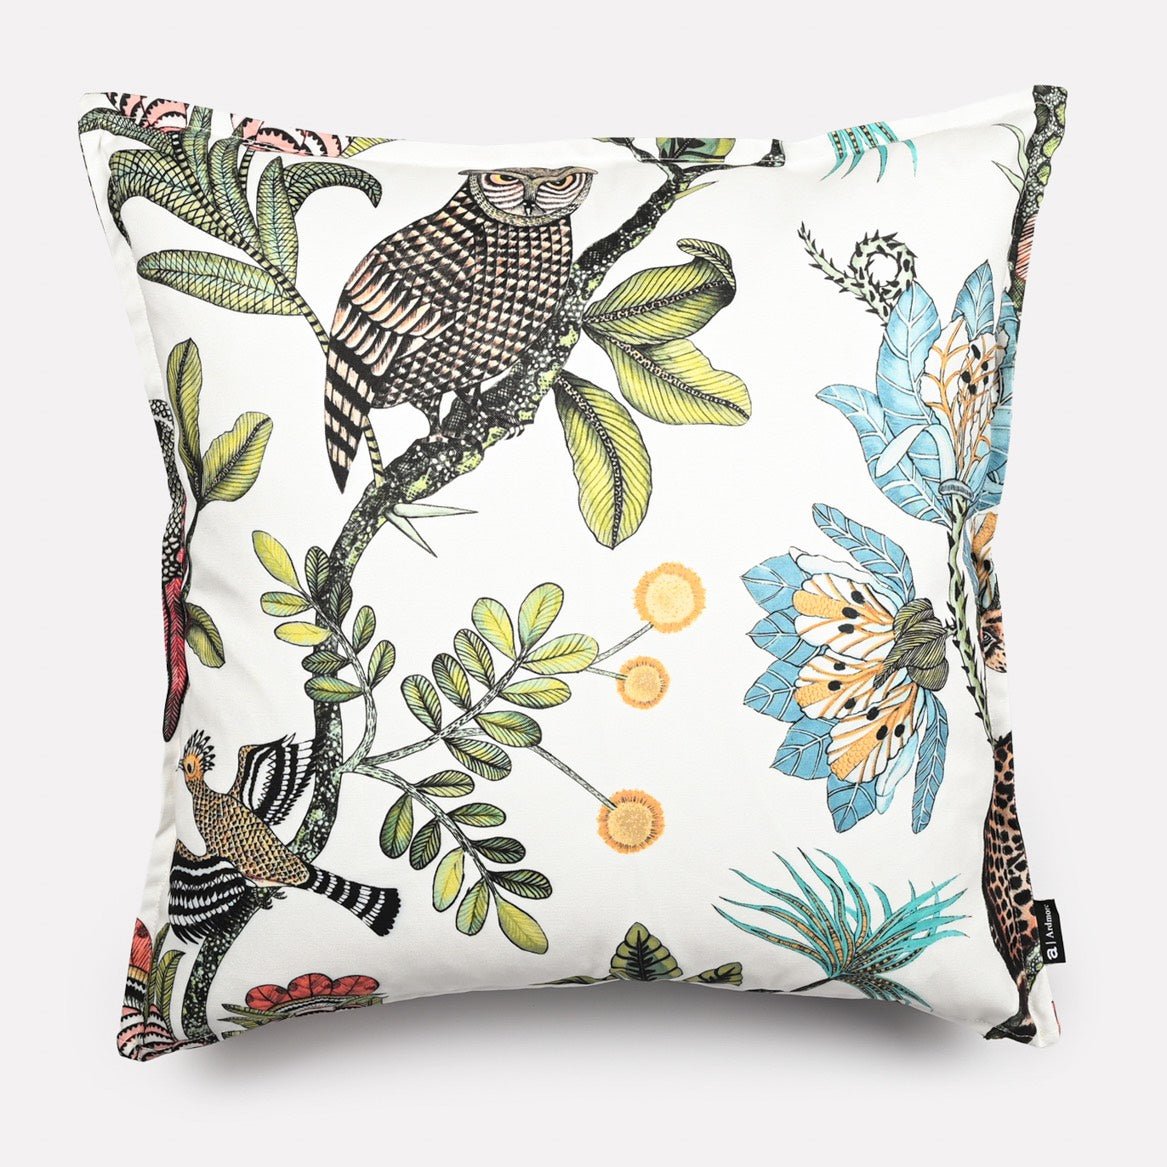 Camp Critters Coral Outdoor Cushion Cover